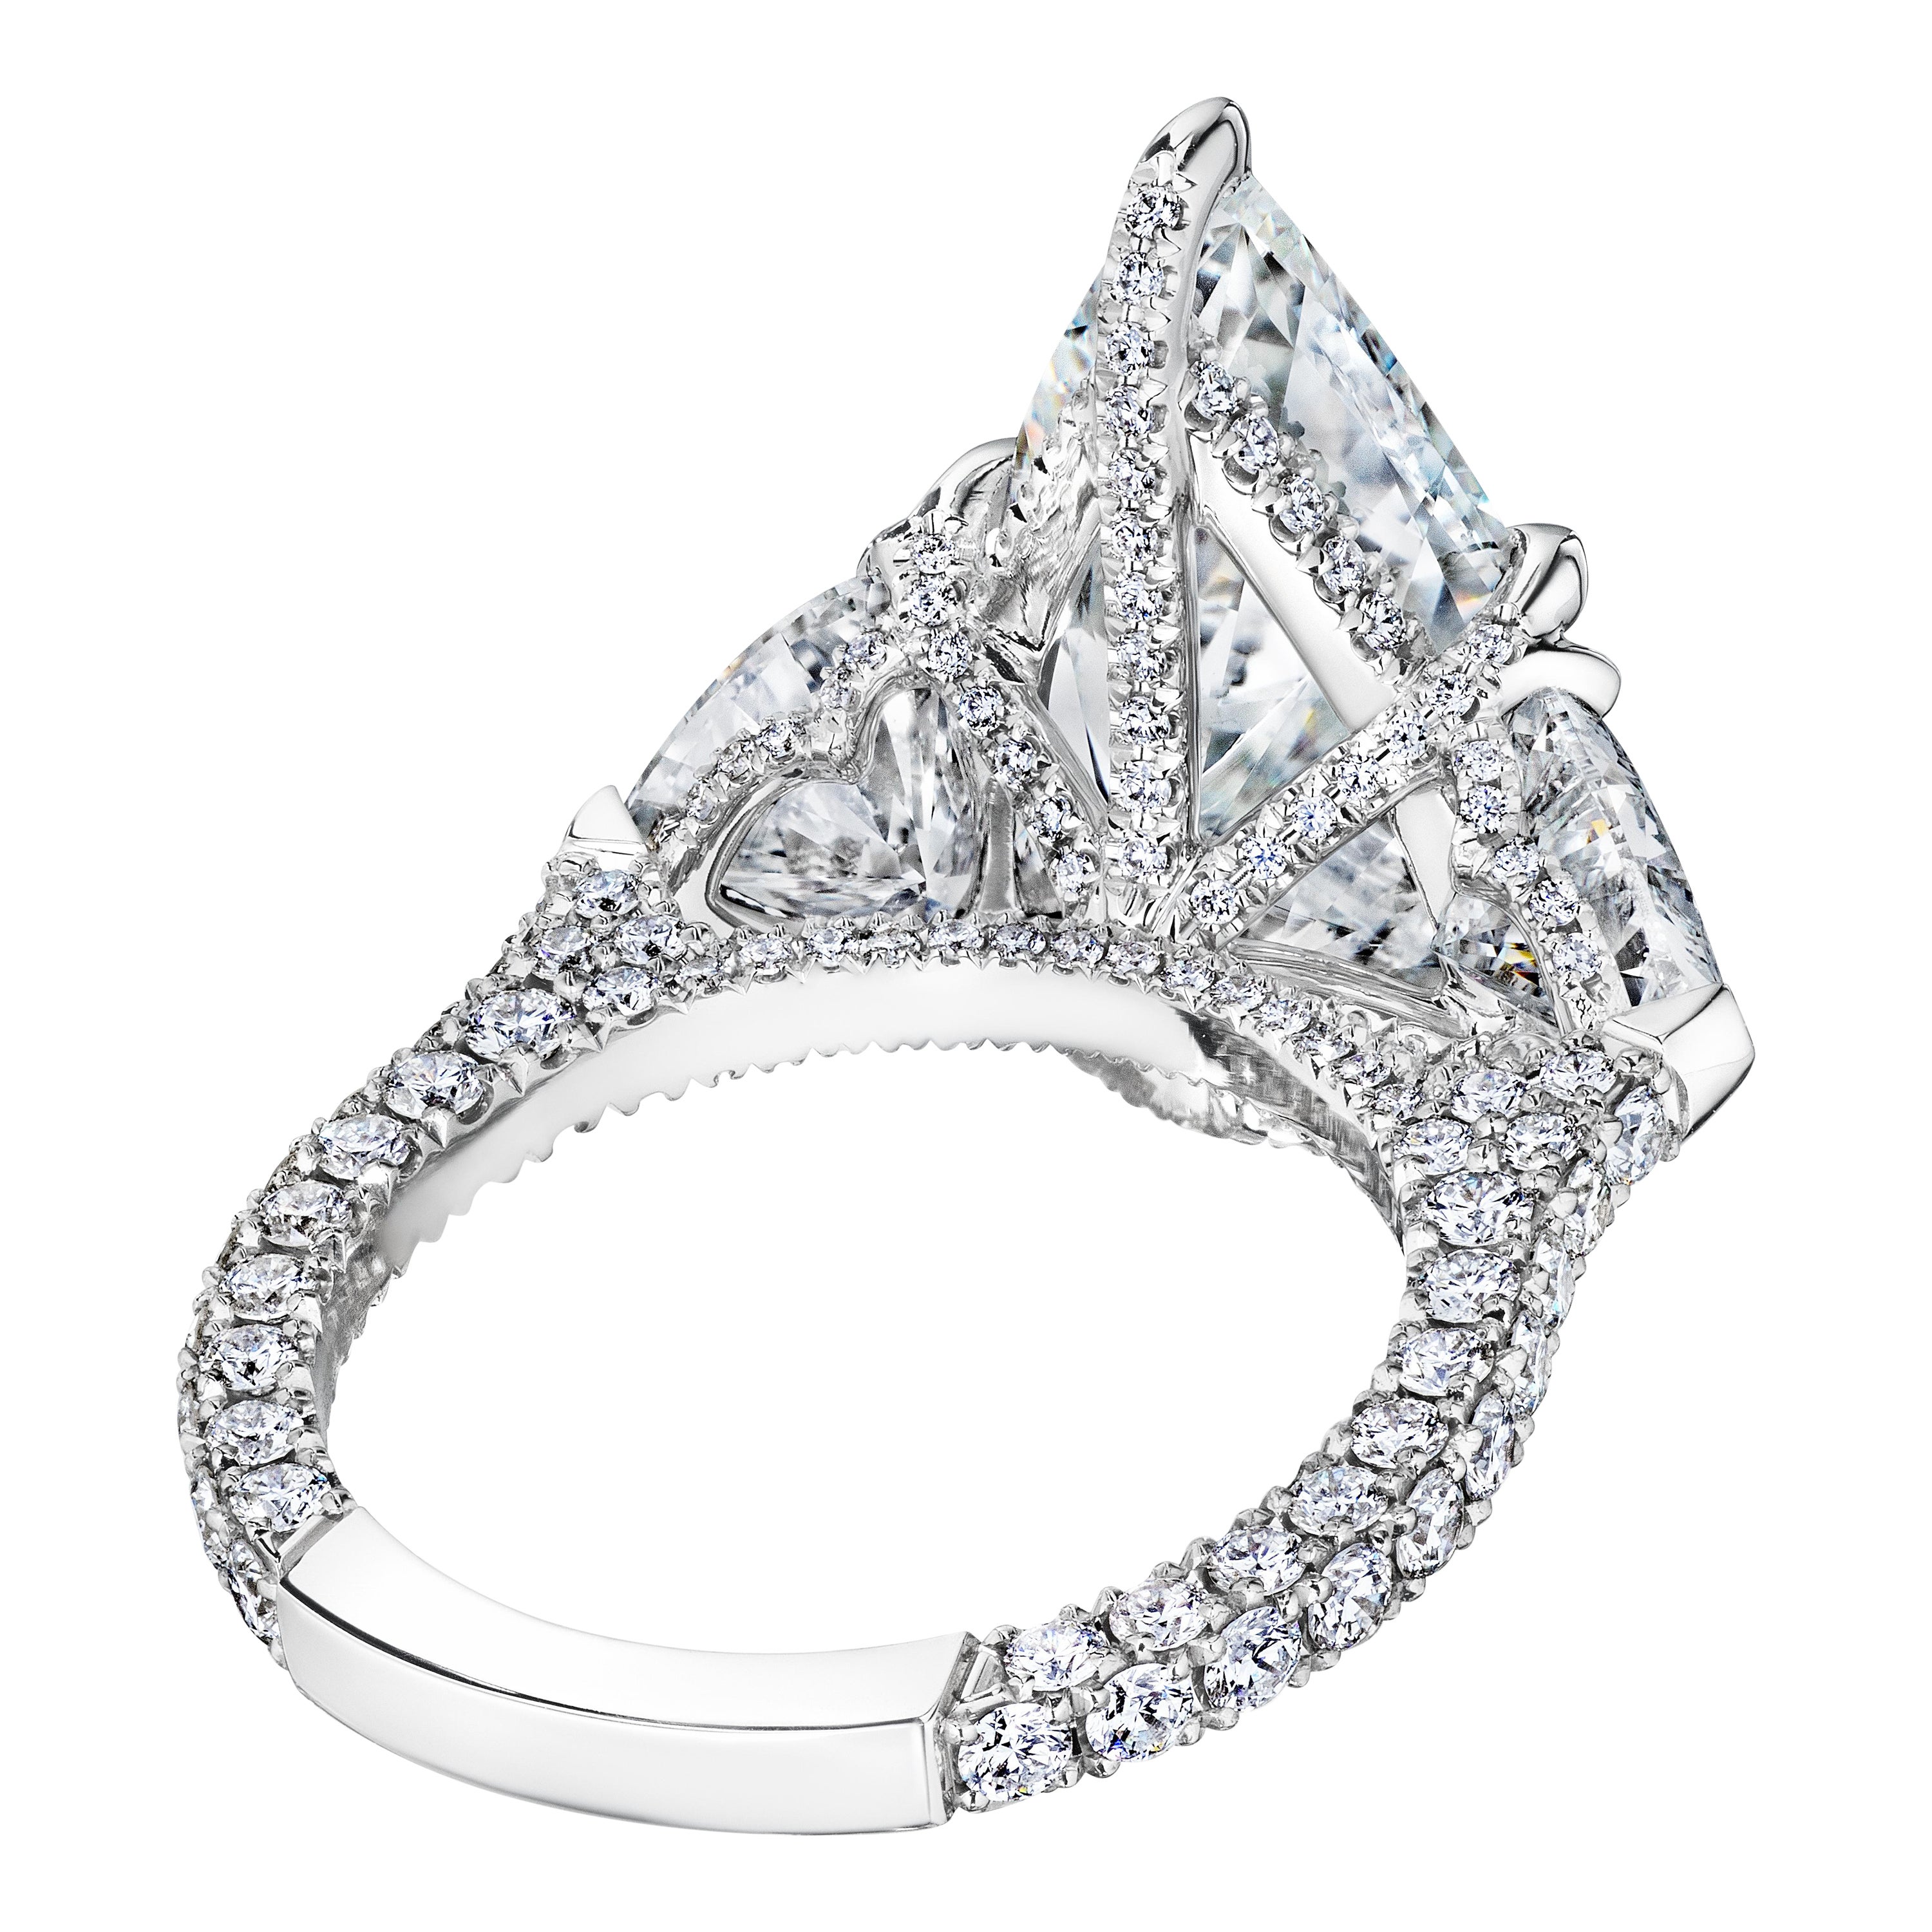 Kristen 5.60 Carat GIA Certified Pear Shape E in Color and VS1 in Clarity